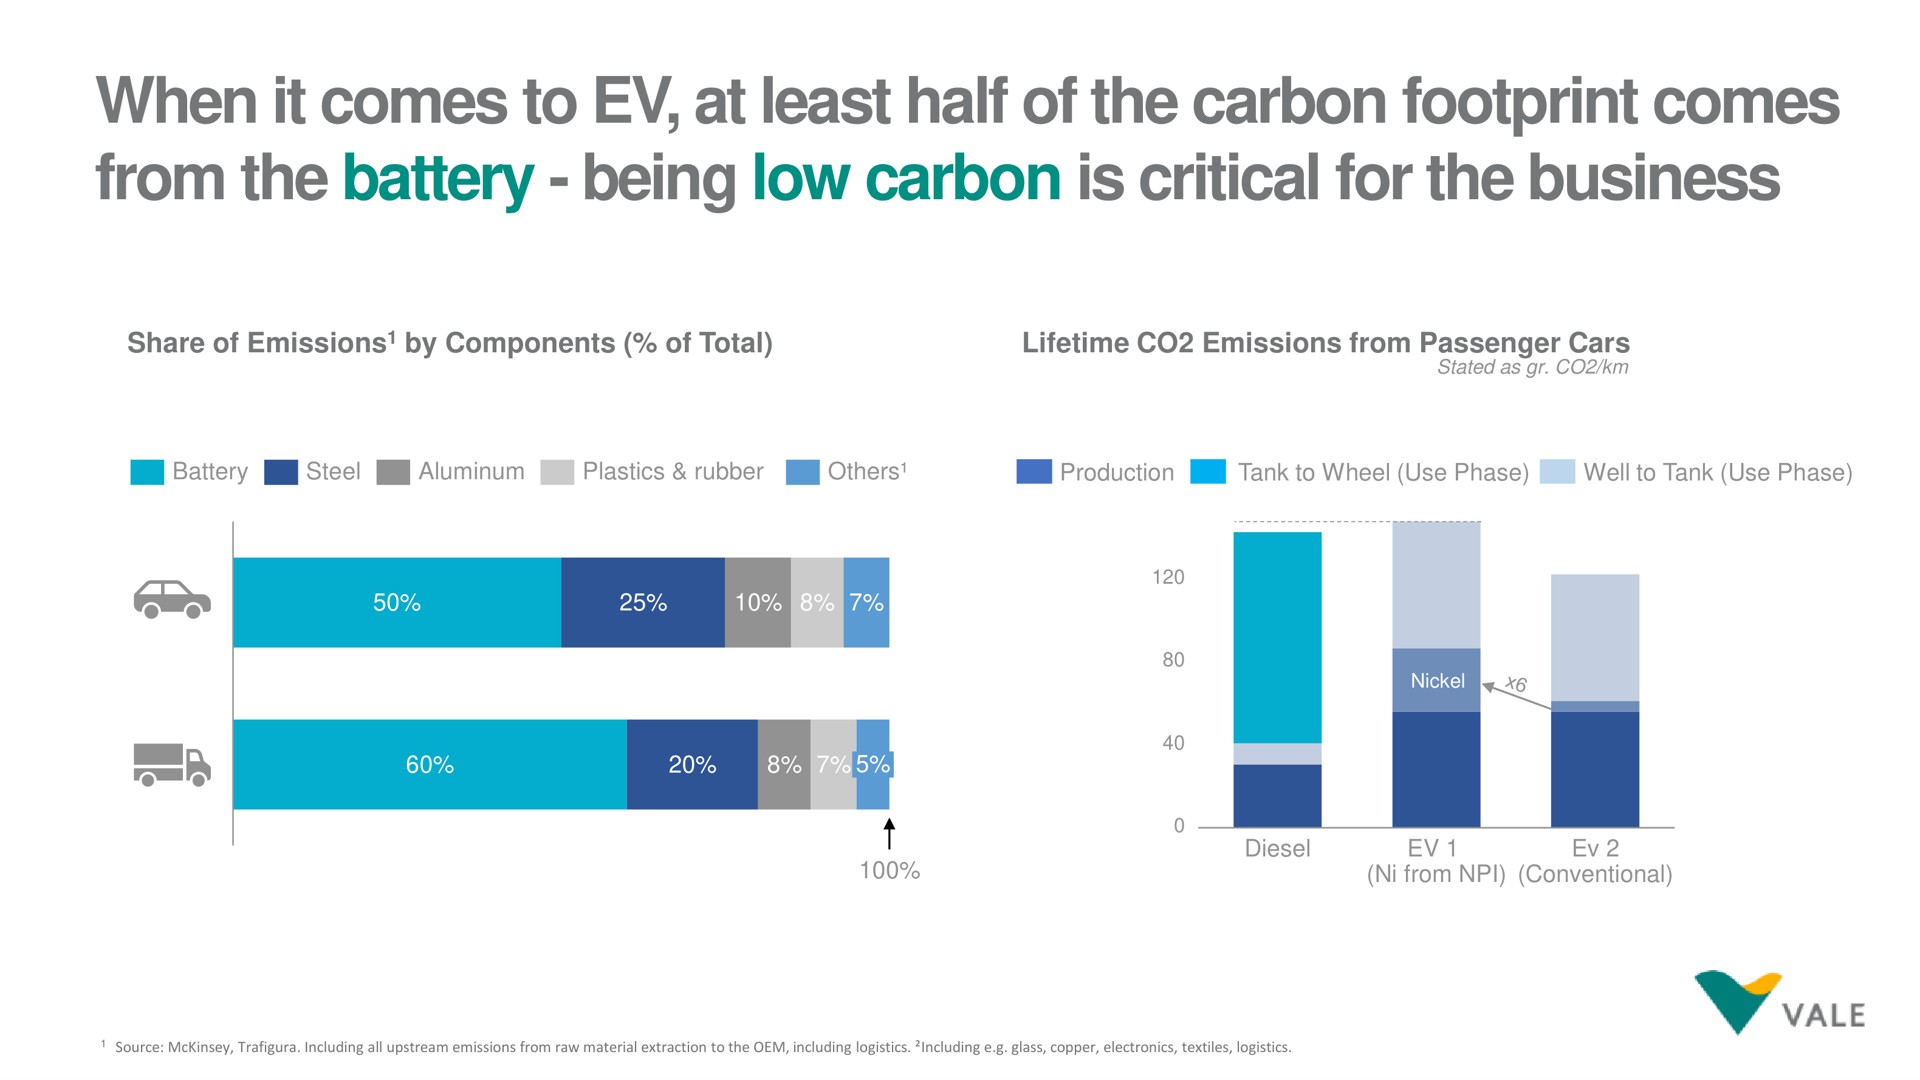 when it comes to at least half of the carbon footprint comes from the battery being low carbon is critical for the business | Vale